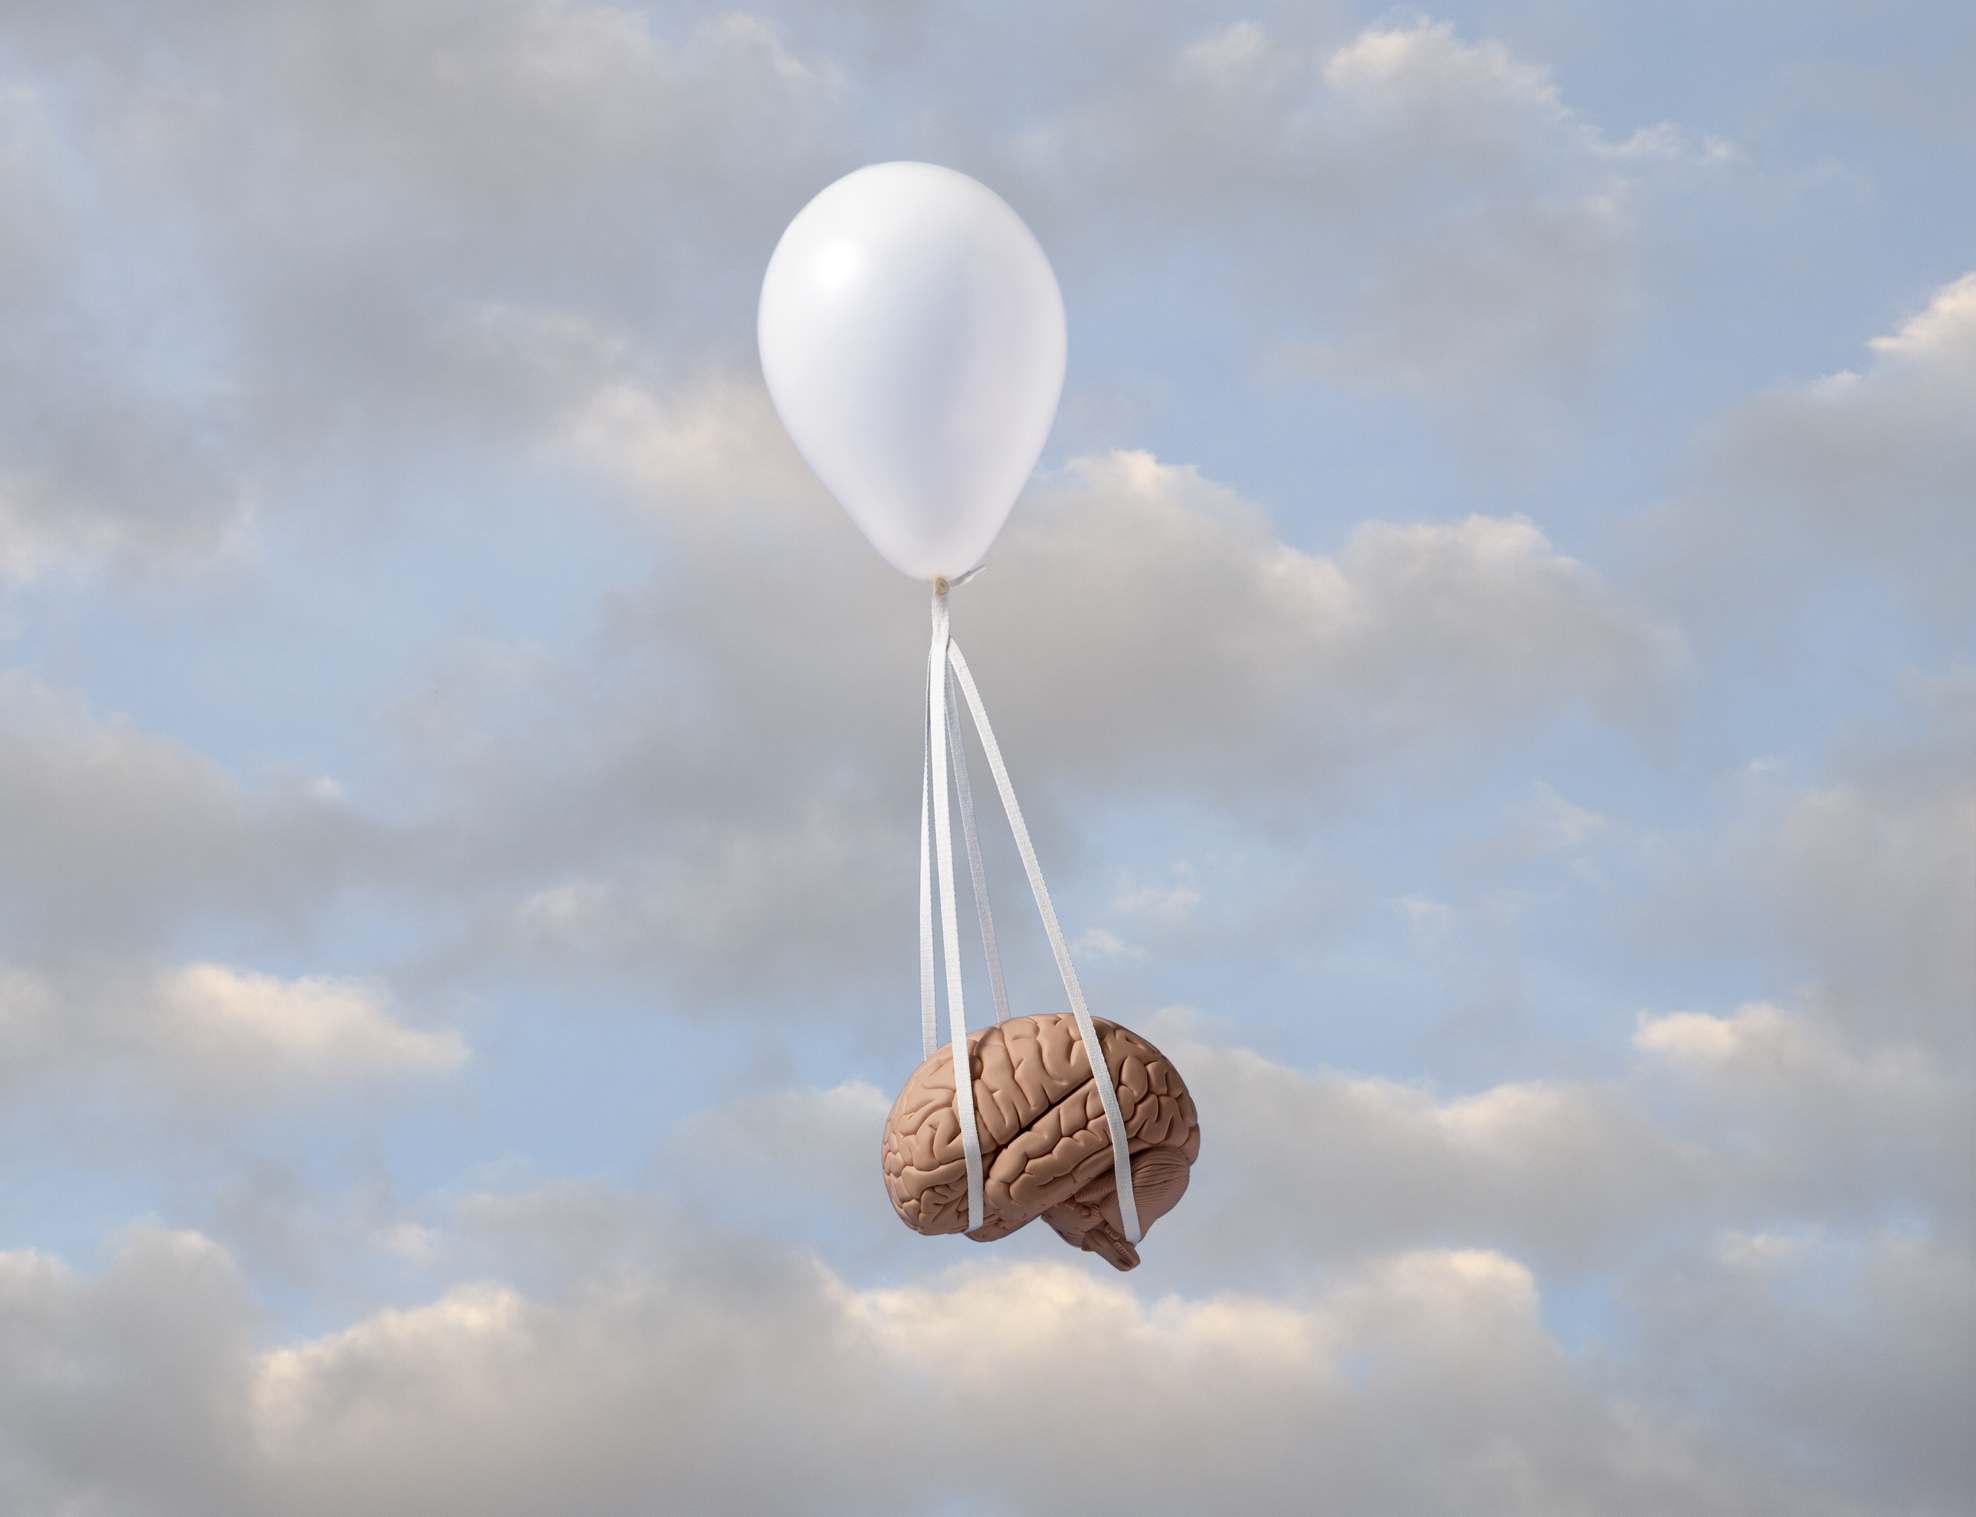 White helium balloon carrying model of human brain with white strings against partly cloudy sky